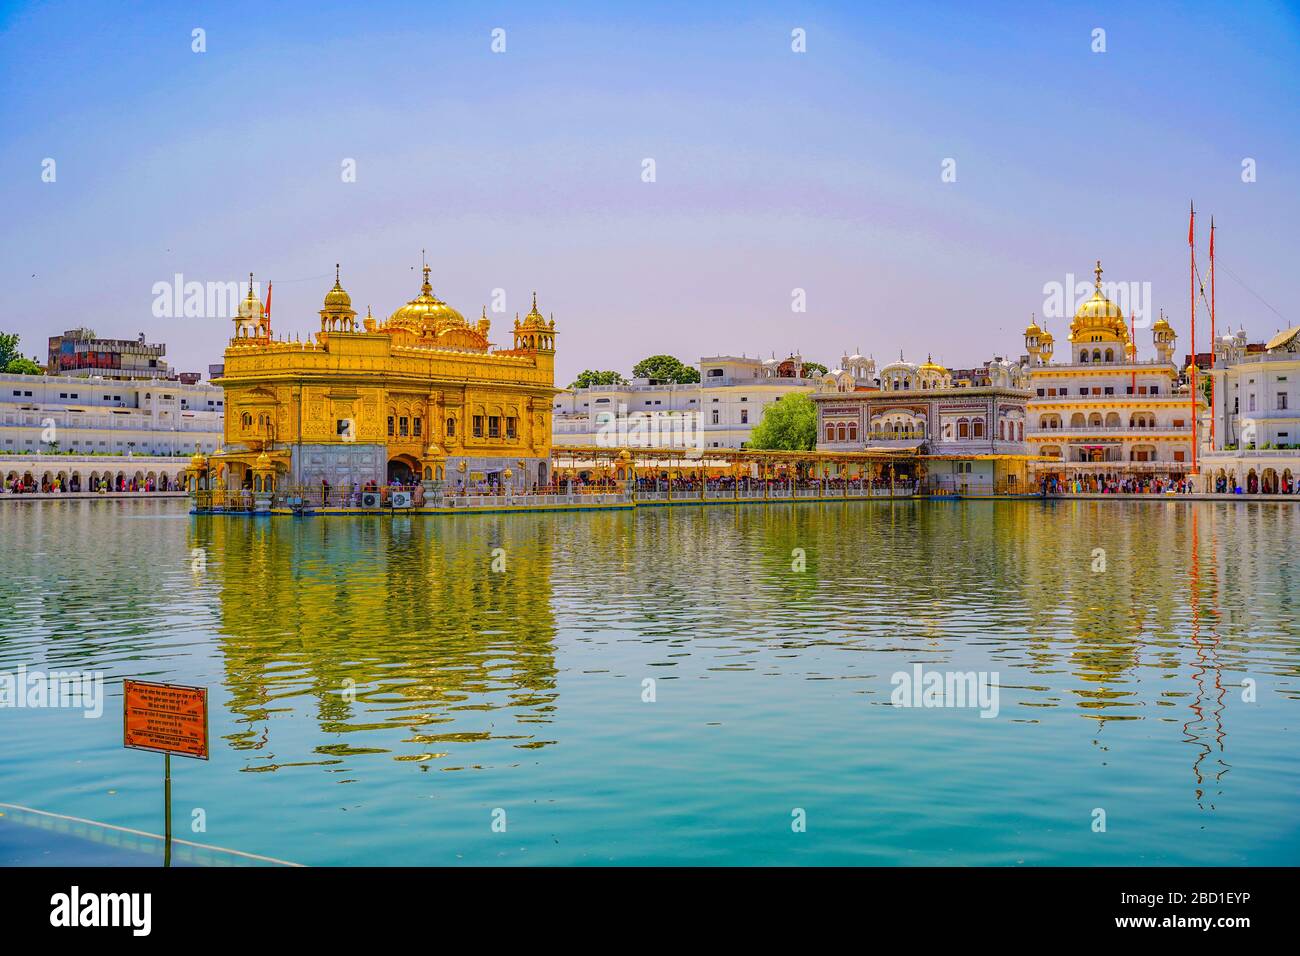 The Harmandar Sahib also known as Darbar Sahib, is a Gurdwara located in  the city of Amritsar, Punjab, India. It is the preeminent pilgrimage site  of Stock Photo - Alamy